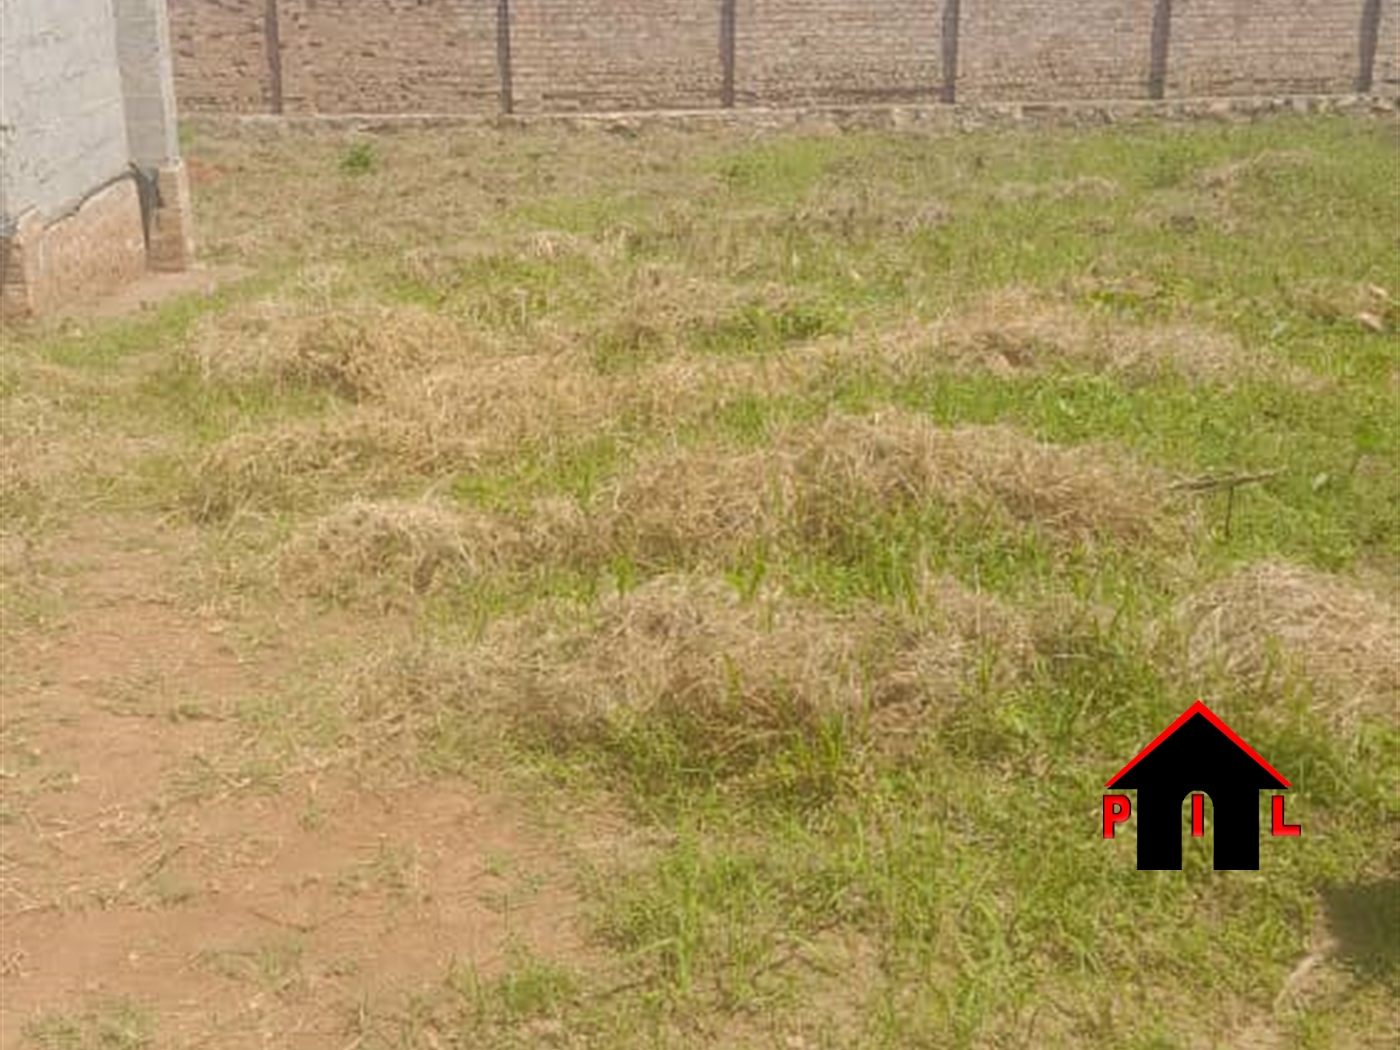 Commercial Land for sale in Lungujja Kampala